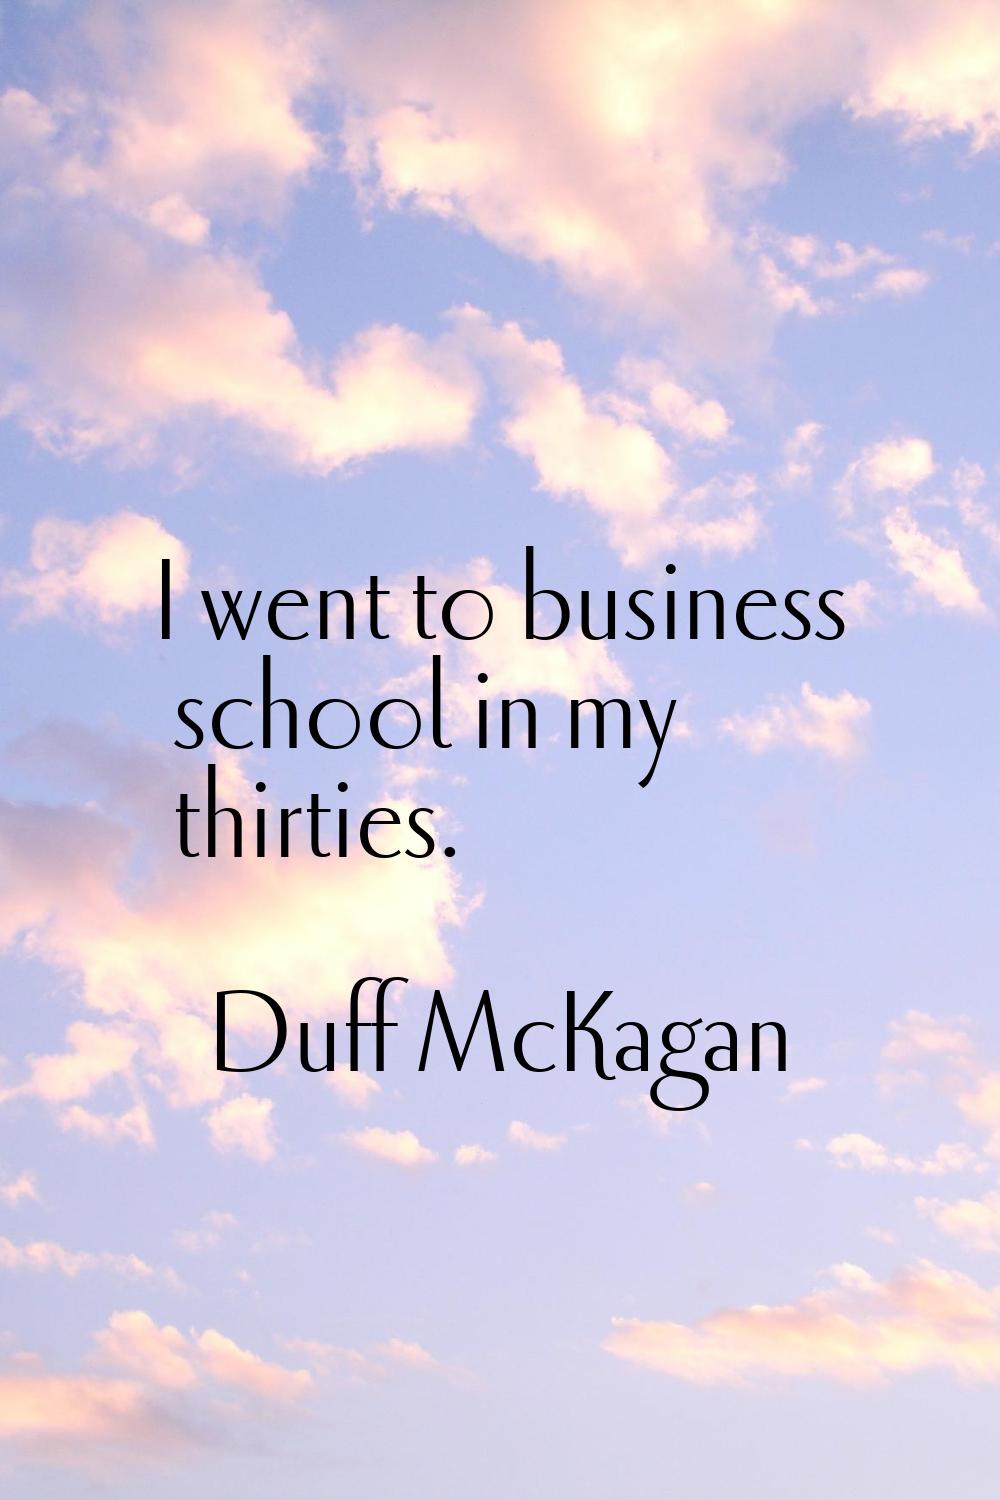 I went to business school in my thirties.